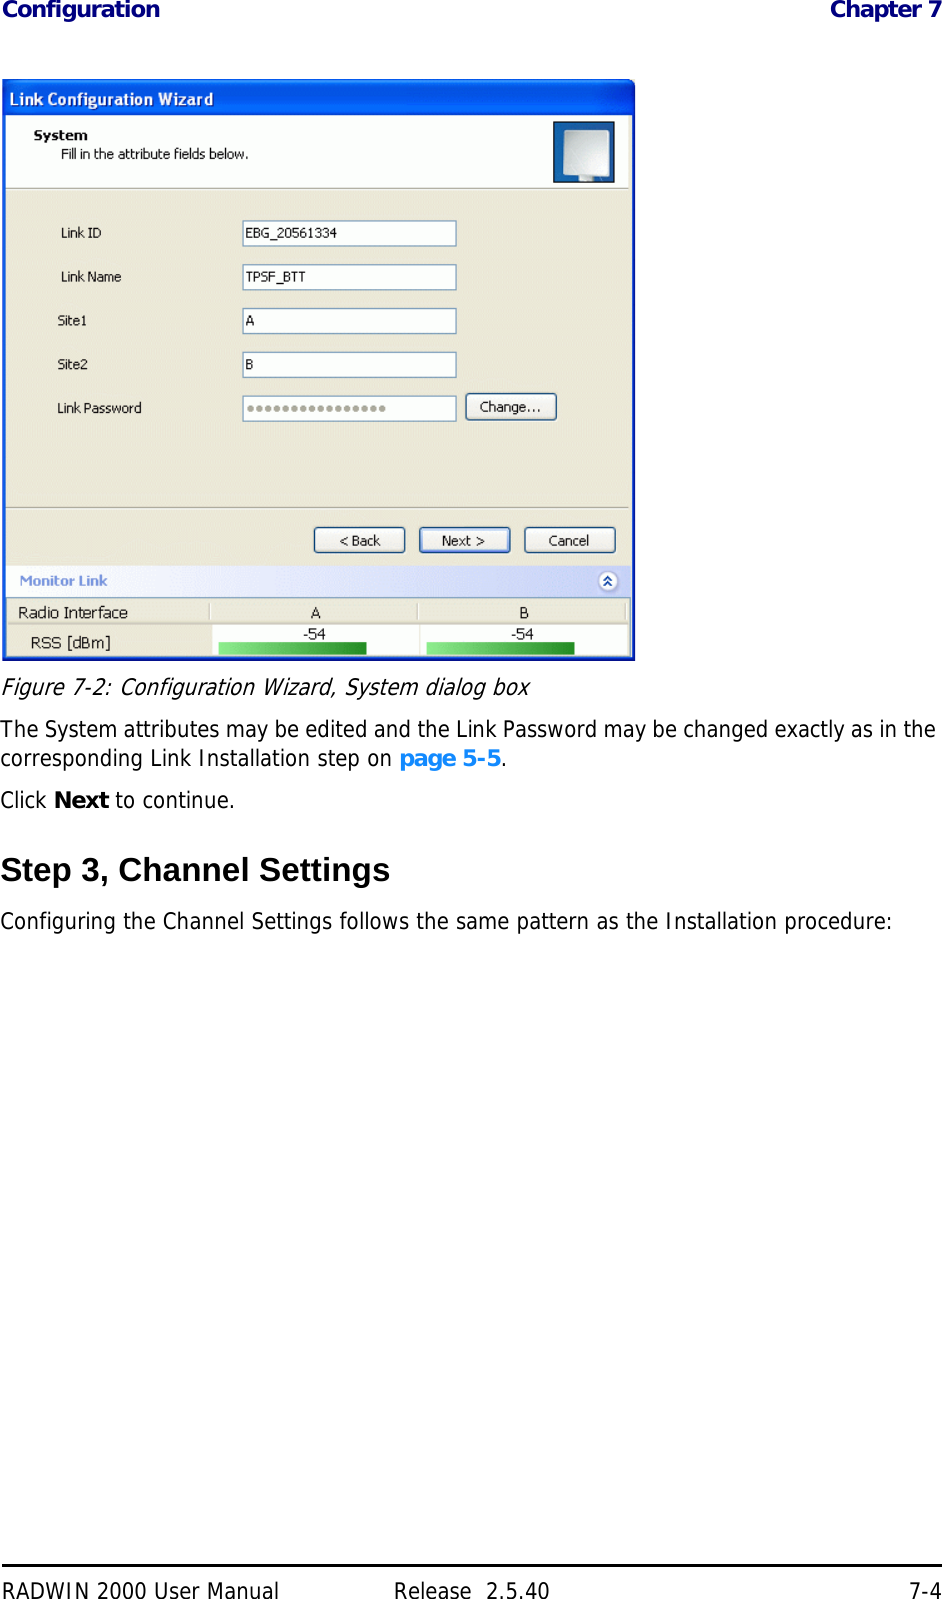 Configuration Chapter 7RADWIN 2000 User Manual Release  2.5.40 7-4Figure 7-2: Configuration Wizard, System dialog boxThe System attributes may be edited and the Link Password may be changed exactly as in the corresponding Link Installation step on page 5-5.Click Next to continue.Step 3, Channel SettingsConfiguring the Channel Settings follows the same pattern as the Installation procedure: